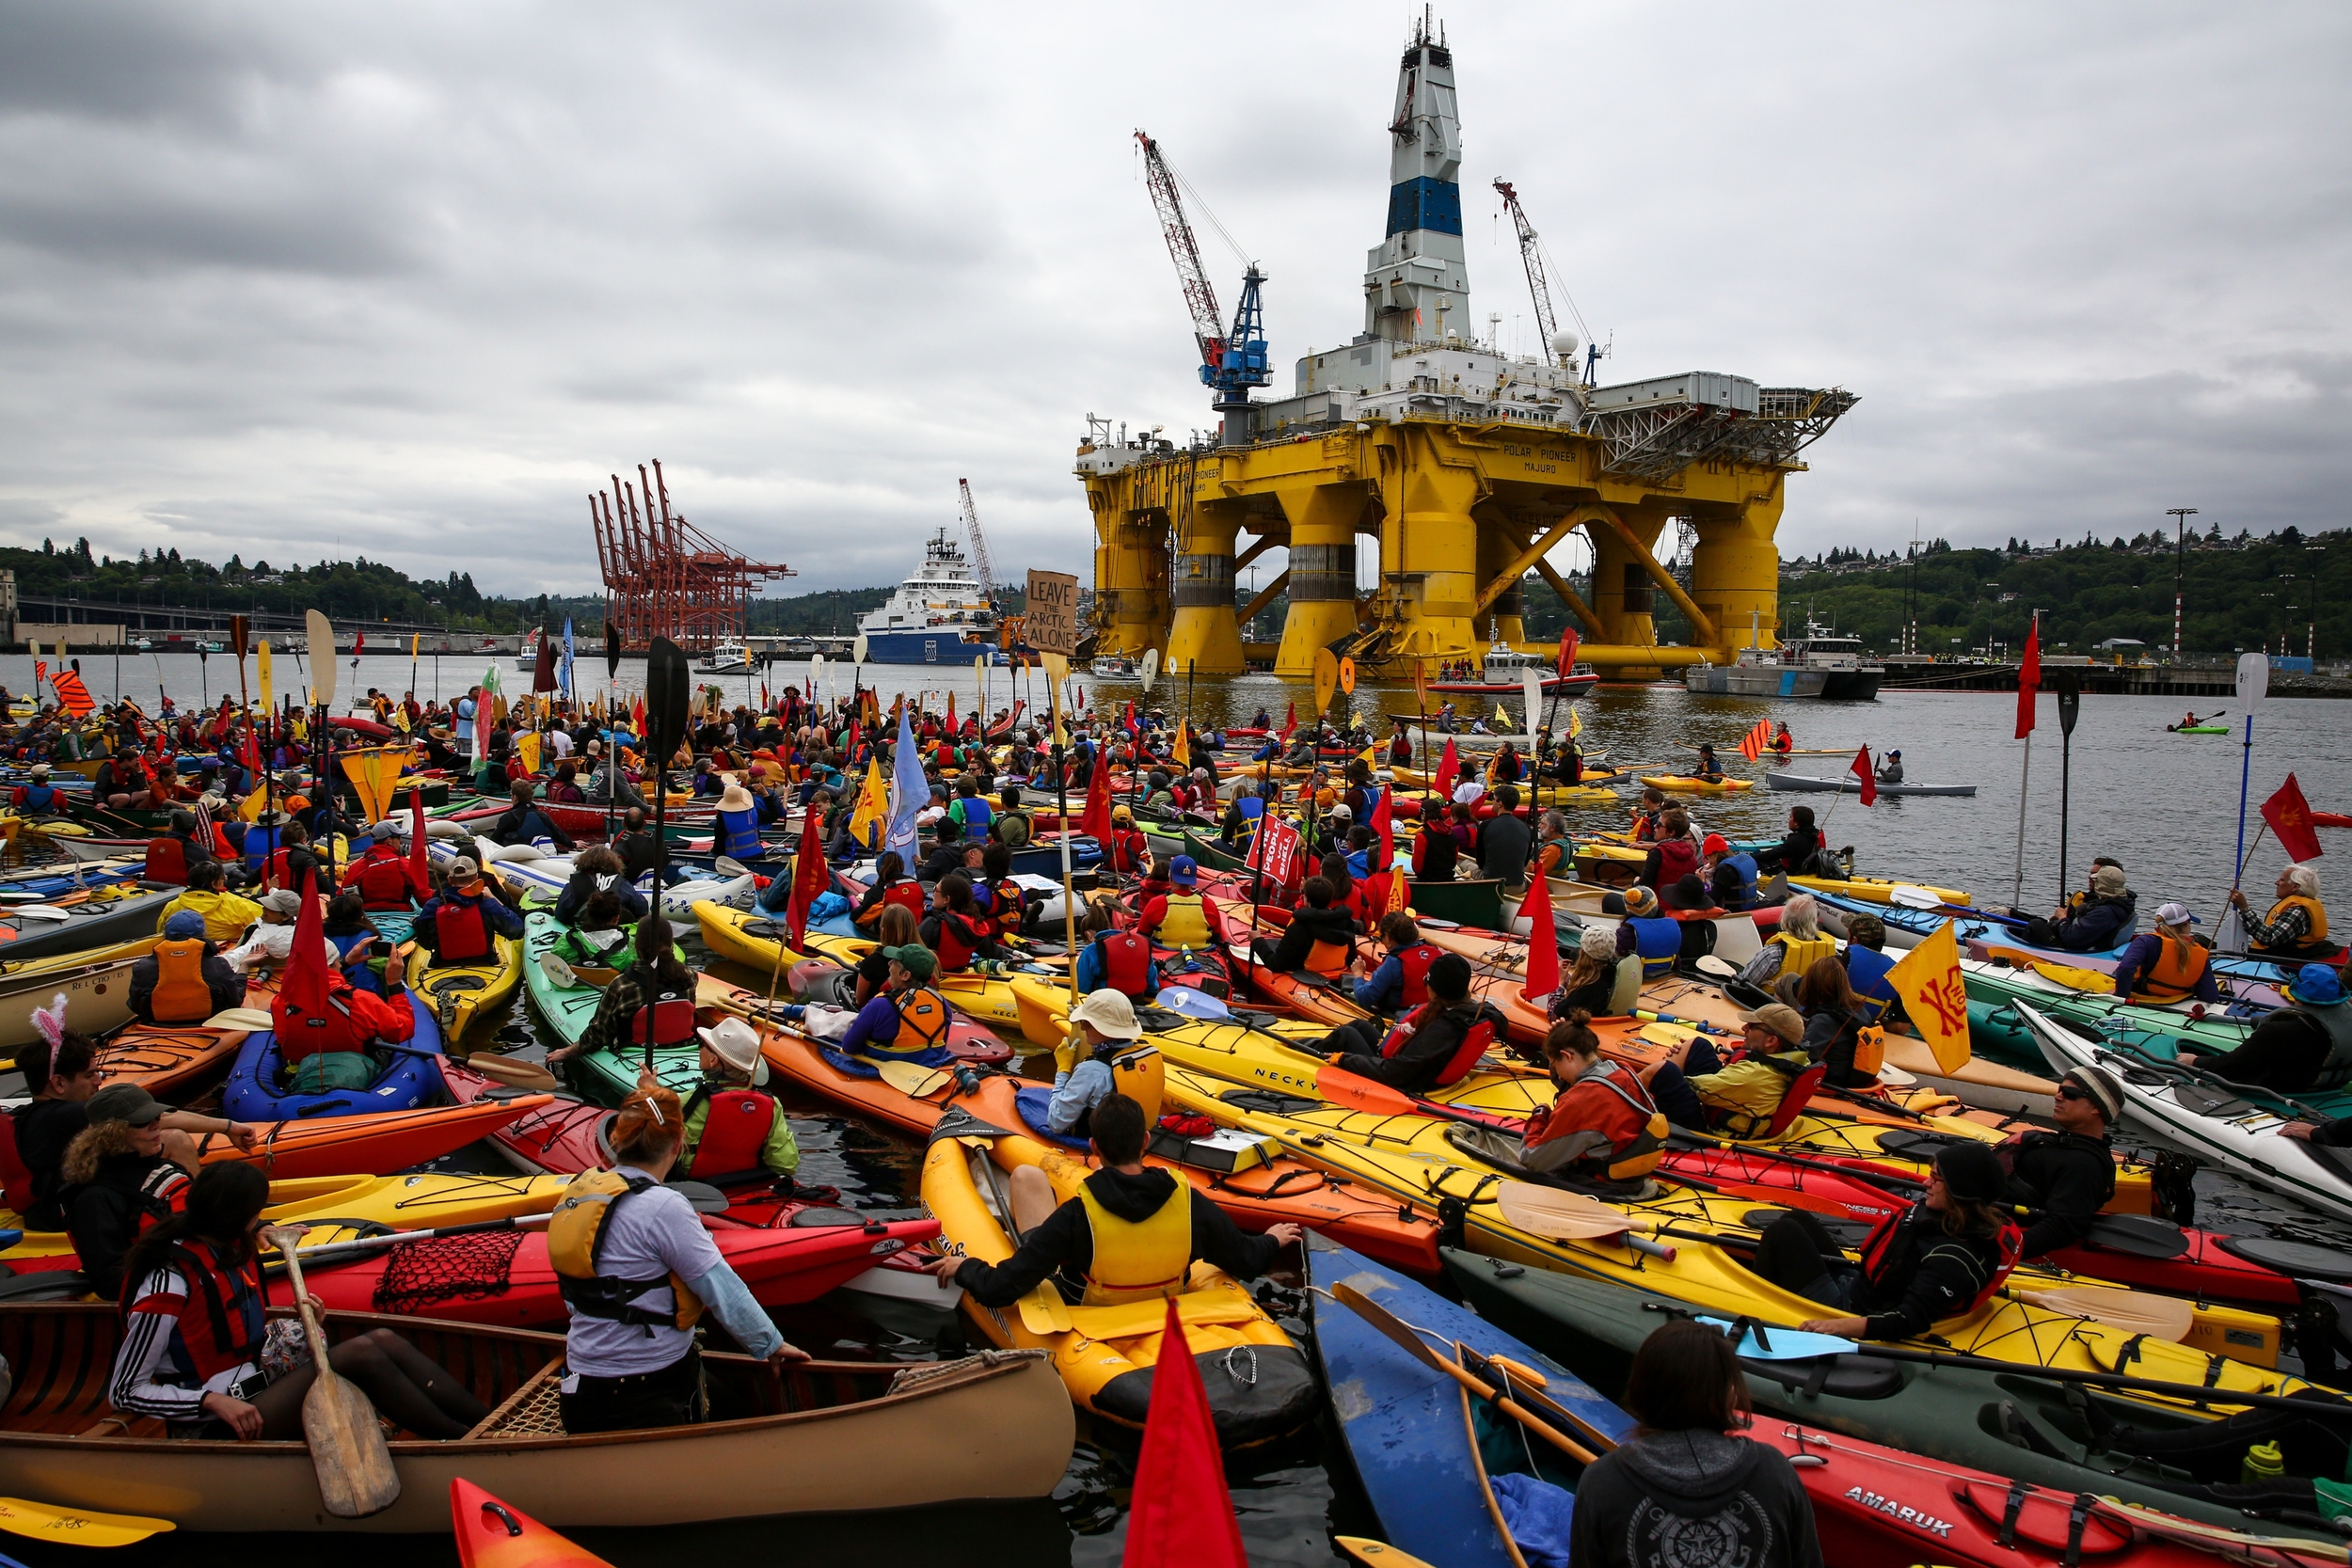   Hundreds of kayaktivists take to the water during protest against drilling in the Arctic and the Port of Seattle being used as a port for the Shell Oil drilling rig Polar Pioneer. Photographed on Saturday, May 16, 2015.  